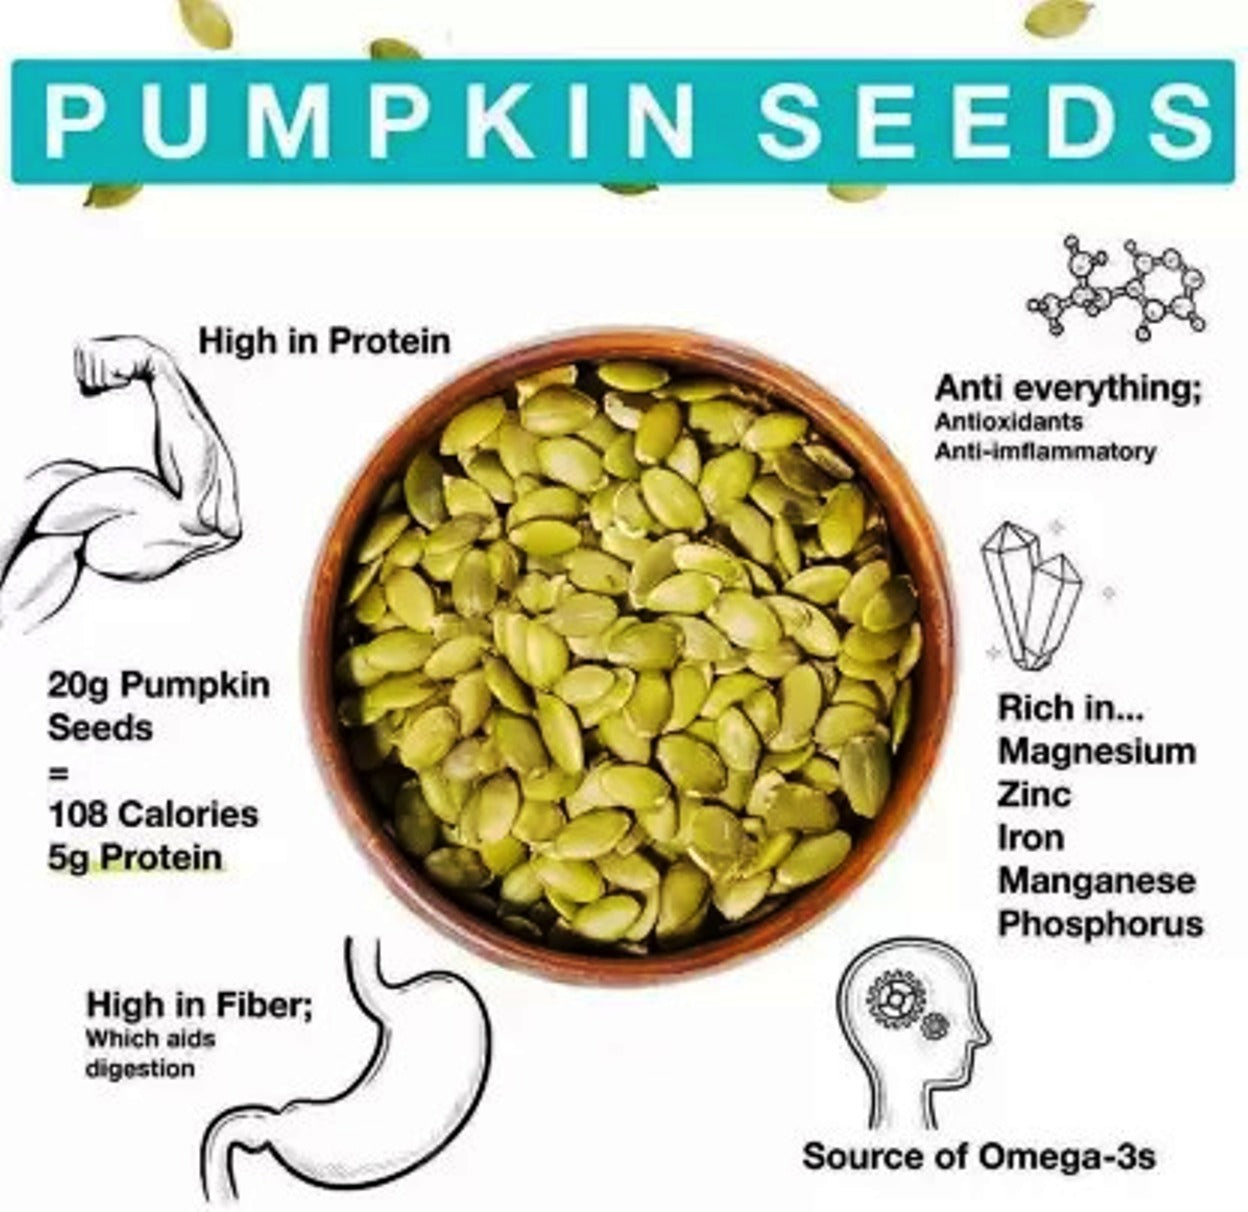 Chastity High Protein & Fiber Raw Pumpkin Seeds for Weight Loss Management 100gm